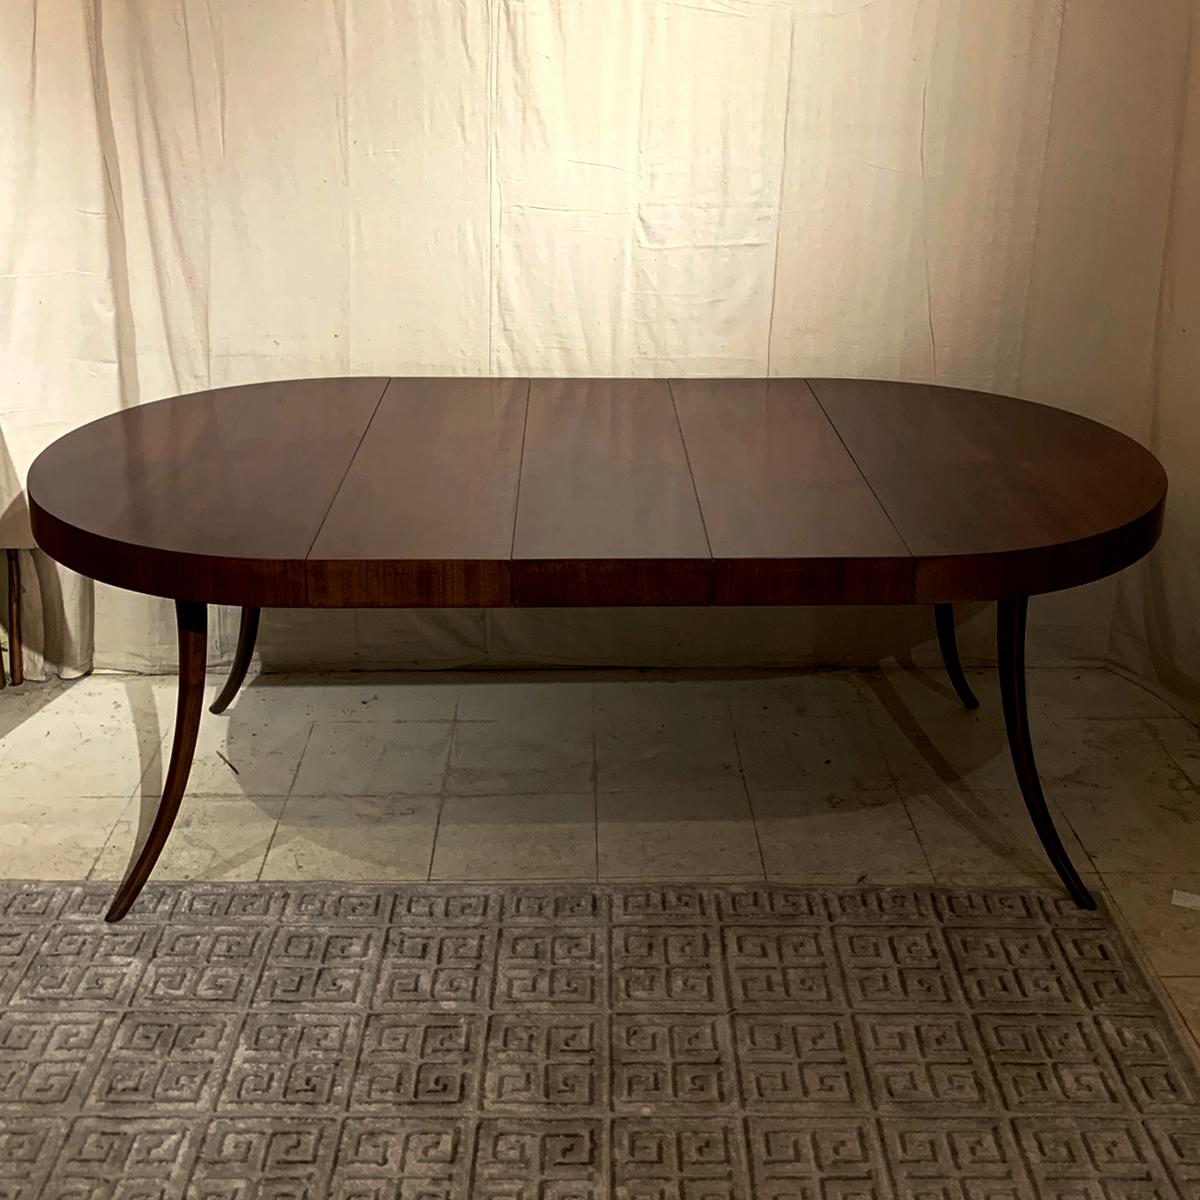 Elegant walnut round dining or center table that has 3 leaves which can be used individually or together for 3 different sized oval dining table options. This table has been fully restored by one of Columbia County's best furniture restorers and